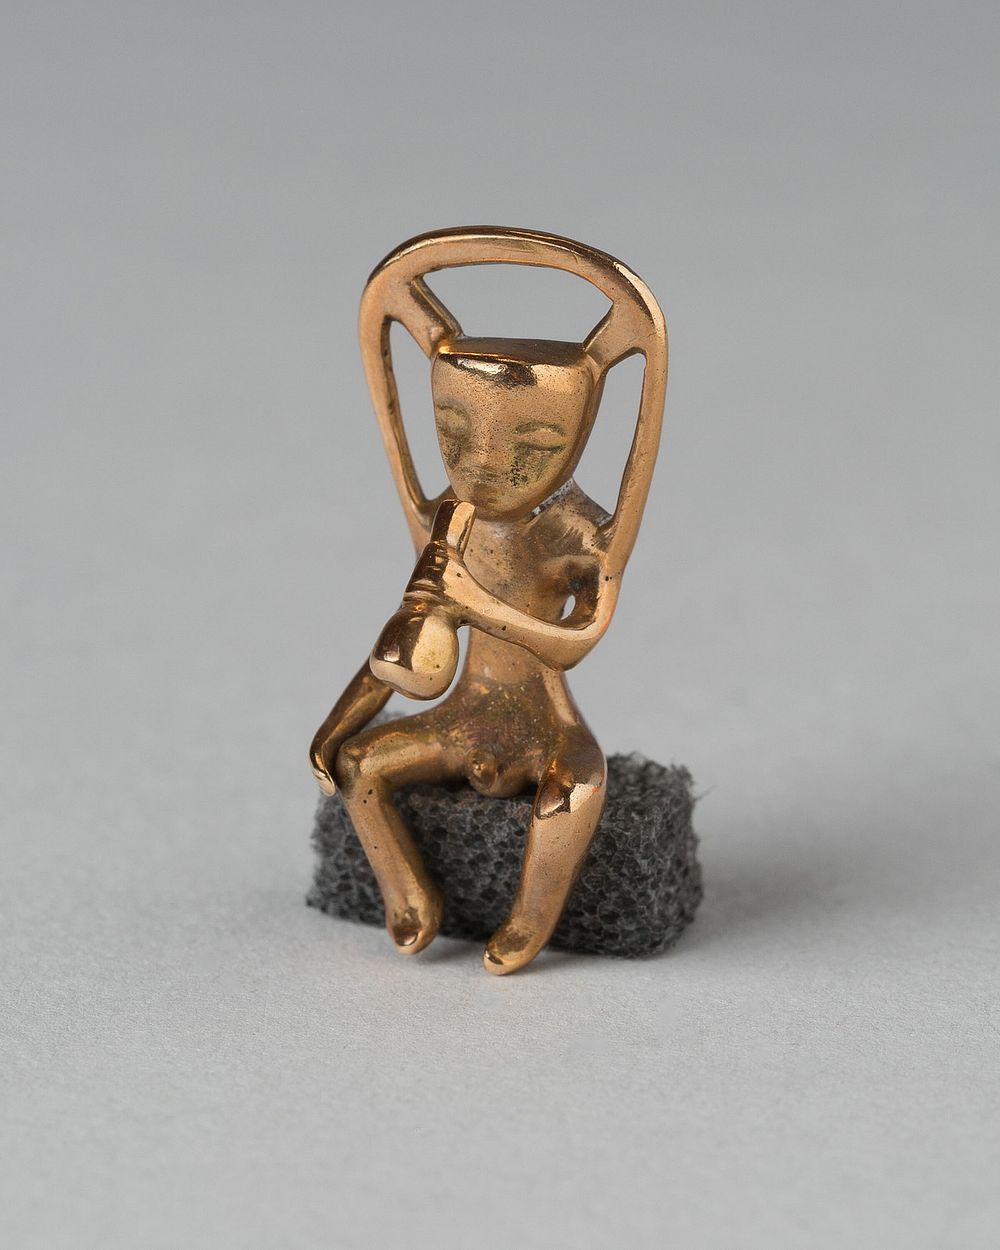 Pendant in the Form of a Seated Musician by Veraguas